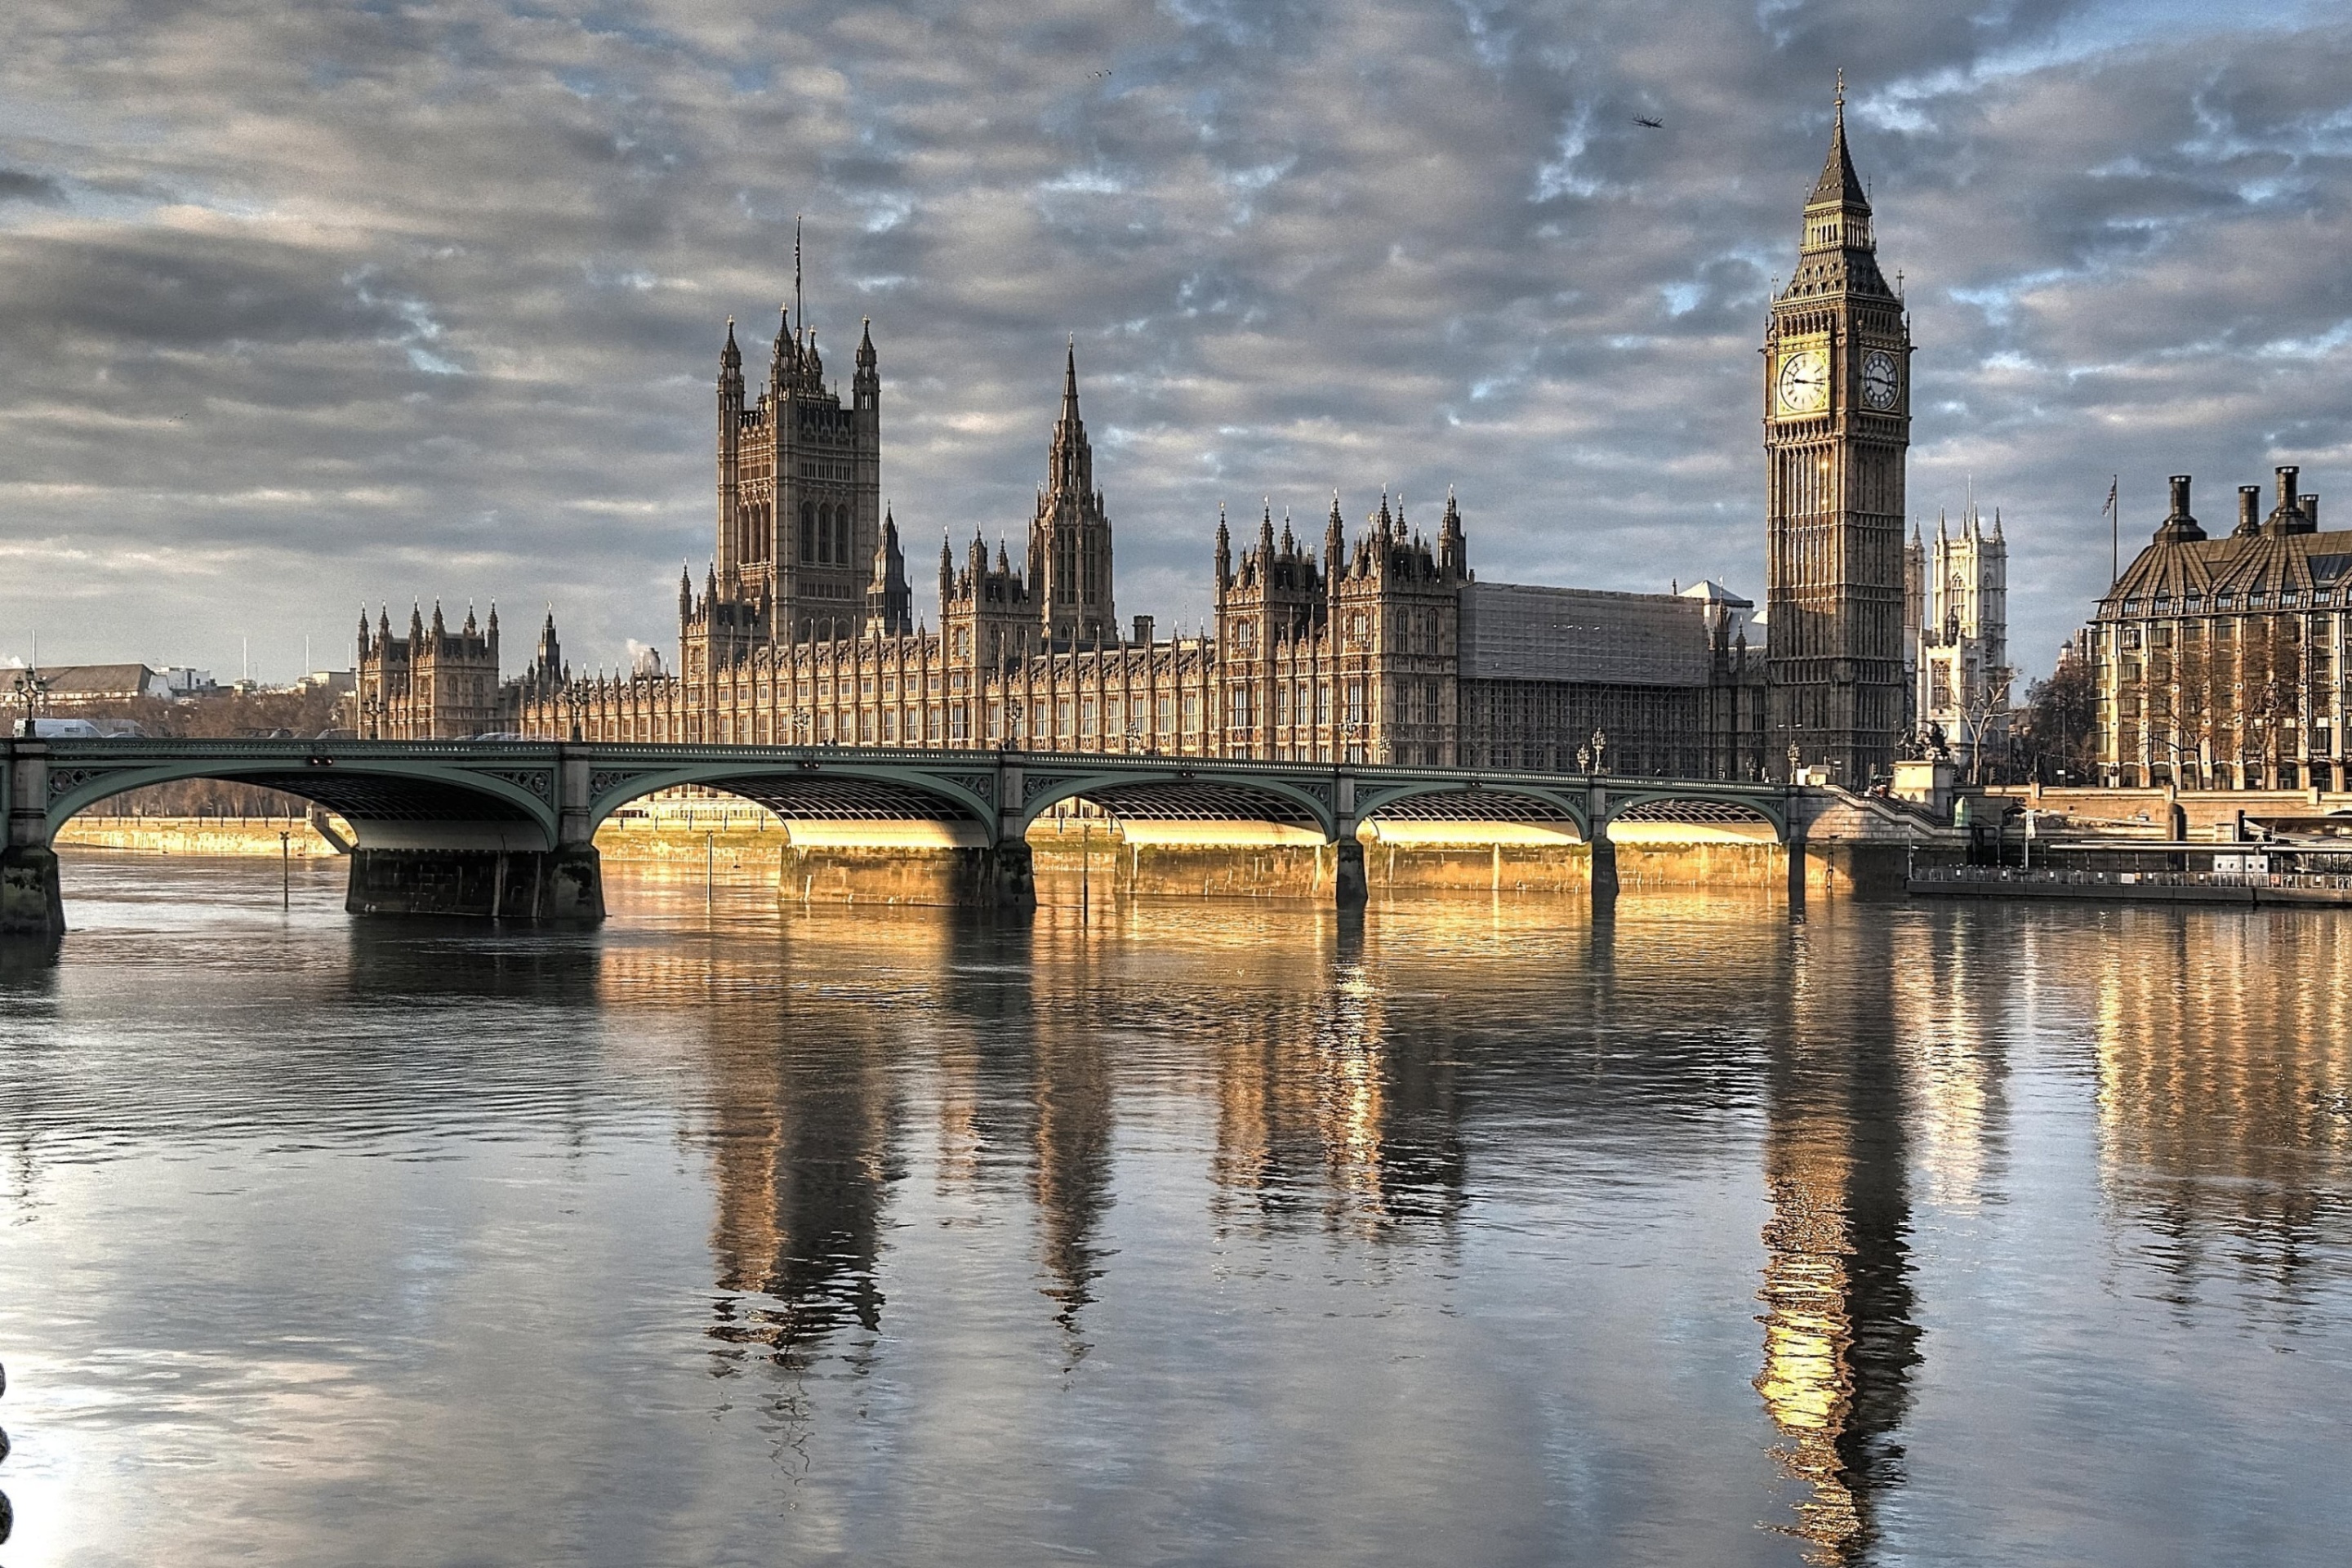 Das Palace of Westminster in London Wallpaper 2880x1920